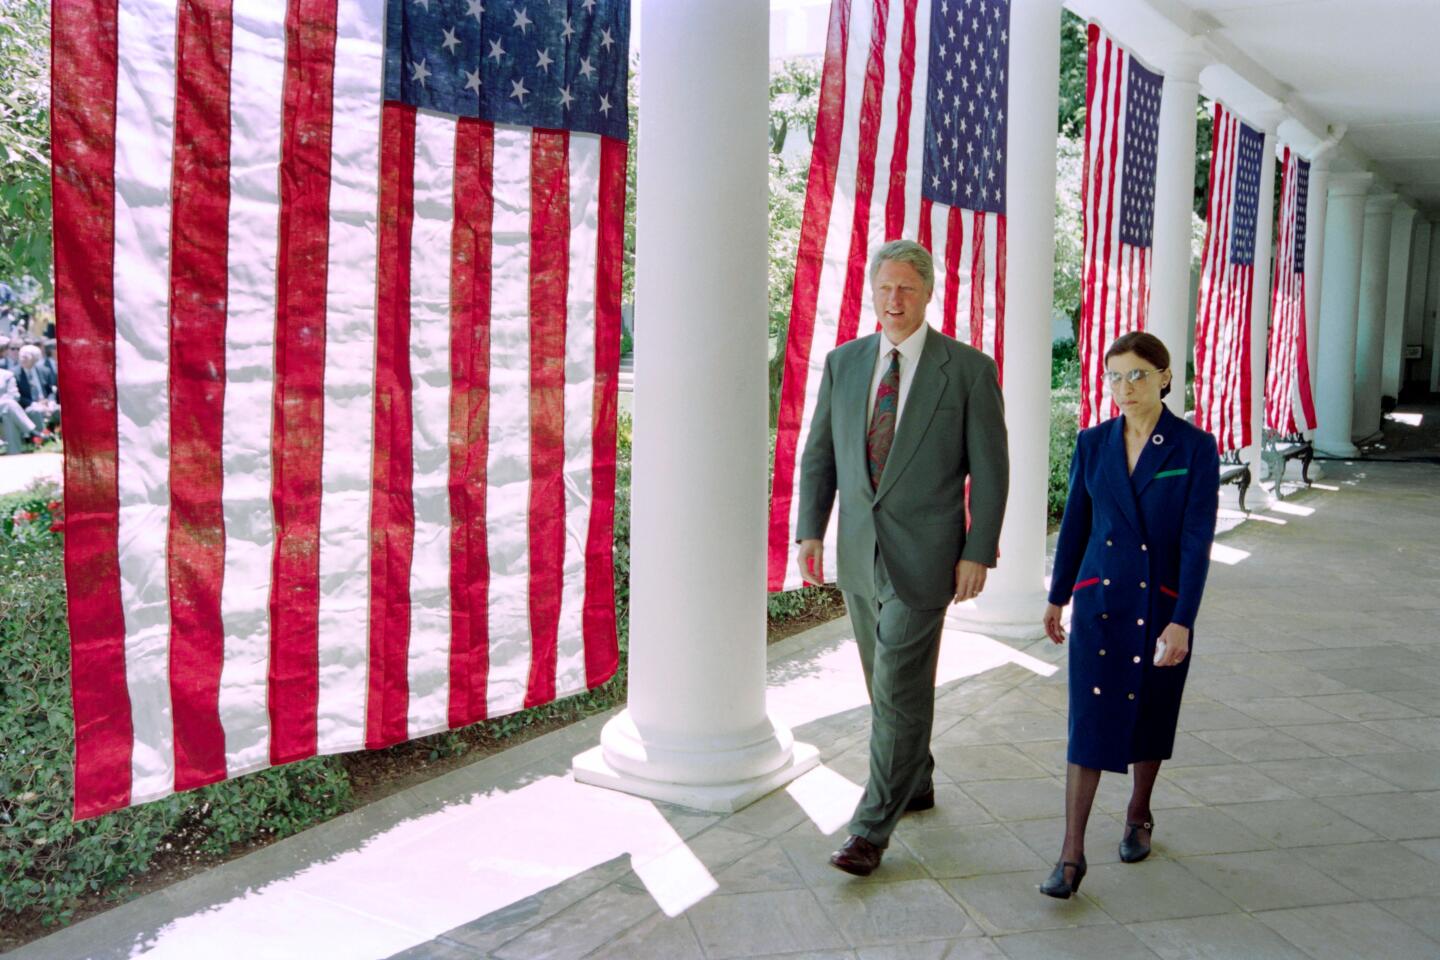 President Clinton and Ruth Bader Ginsburg walk along the outside of the White House in front of hanging U.S. flags